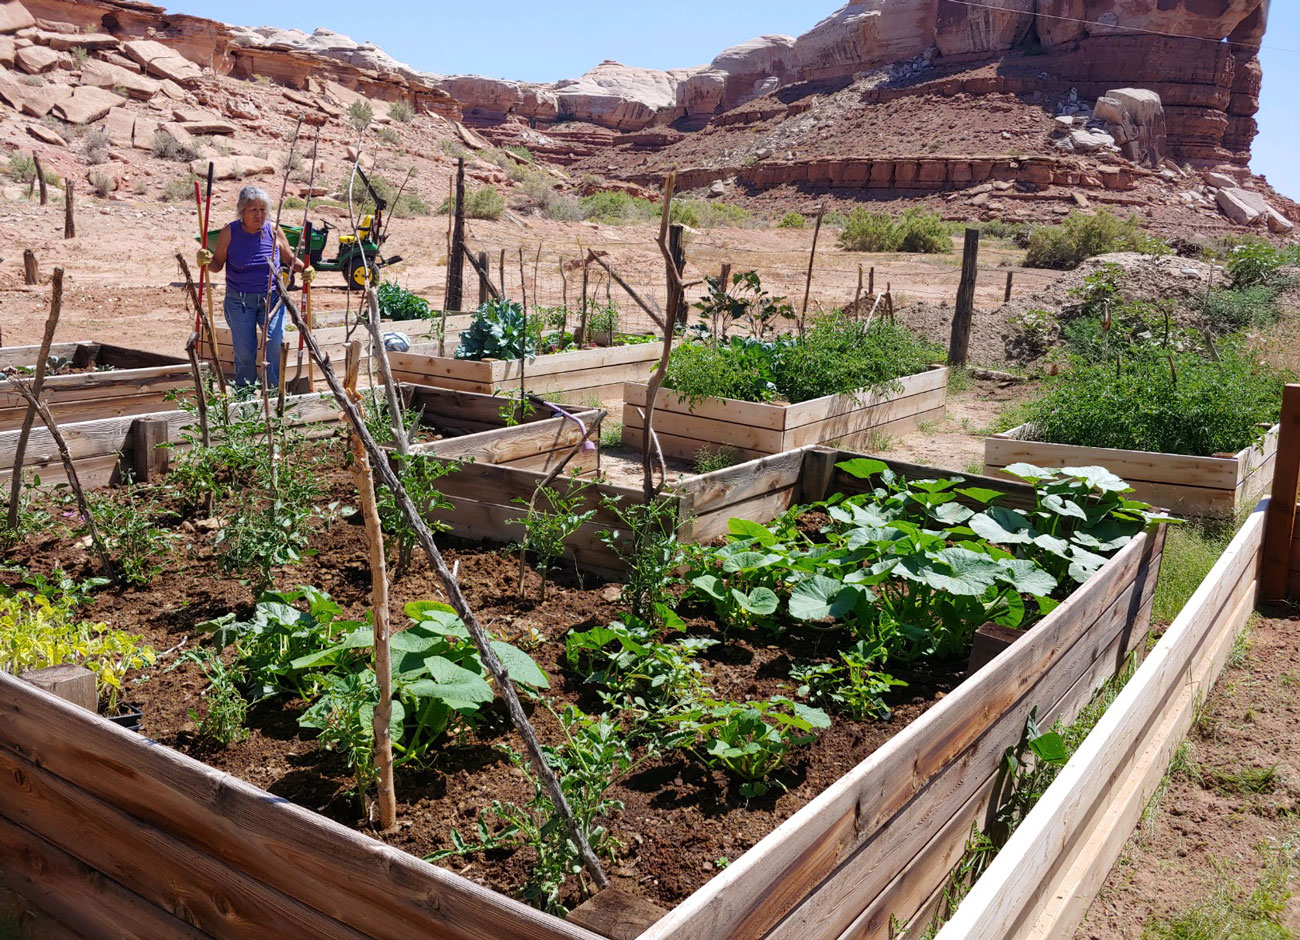 a Native American woman works in a garden surrounded by raised beds and flanked by red rock cliffs